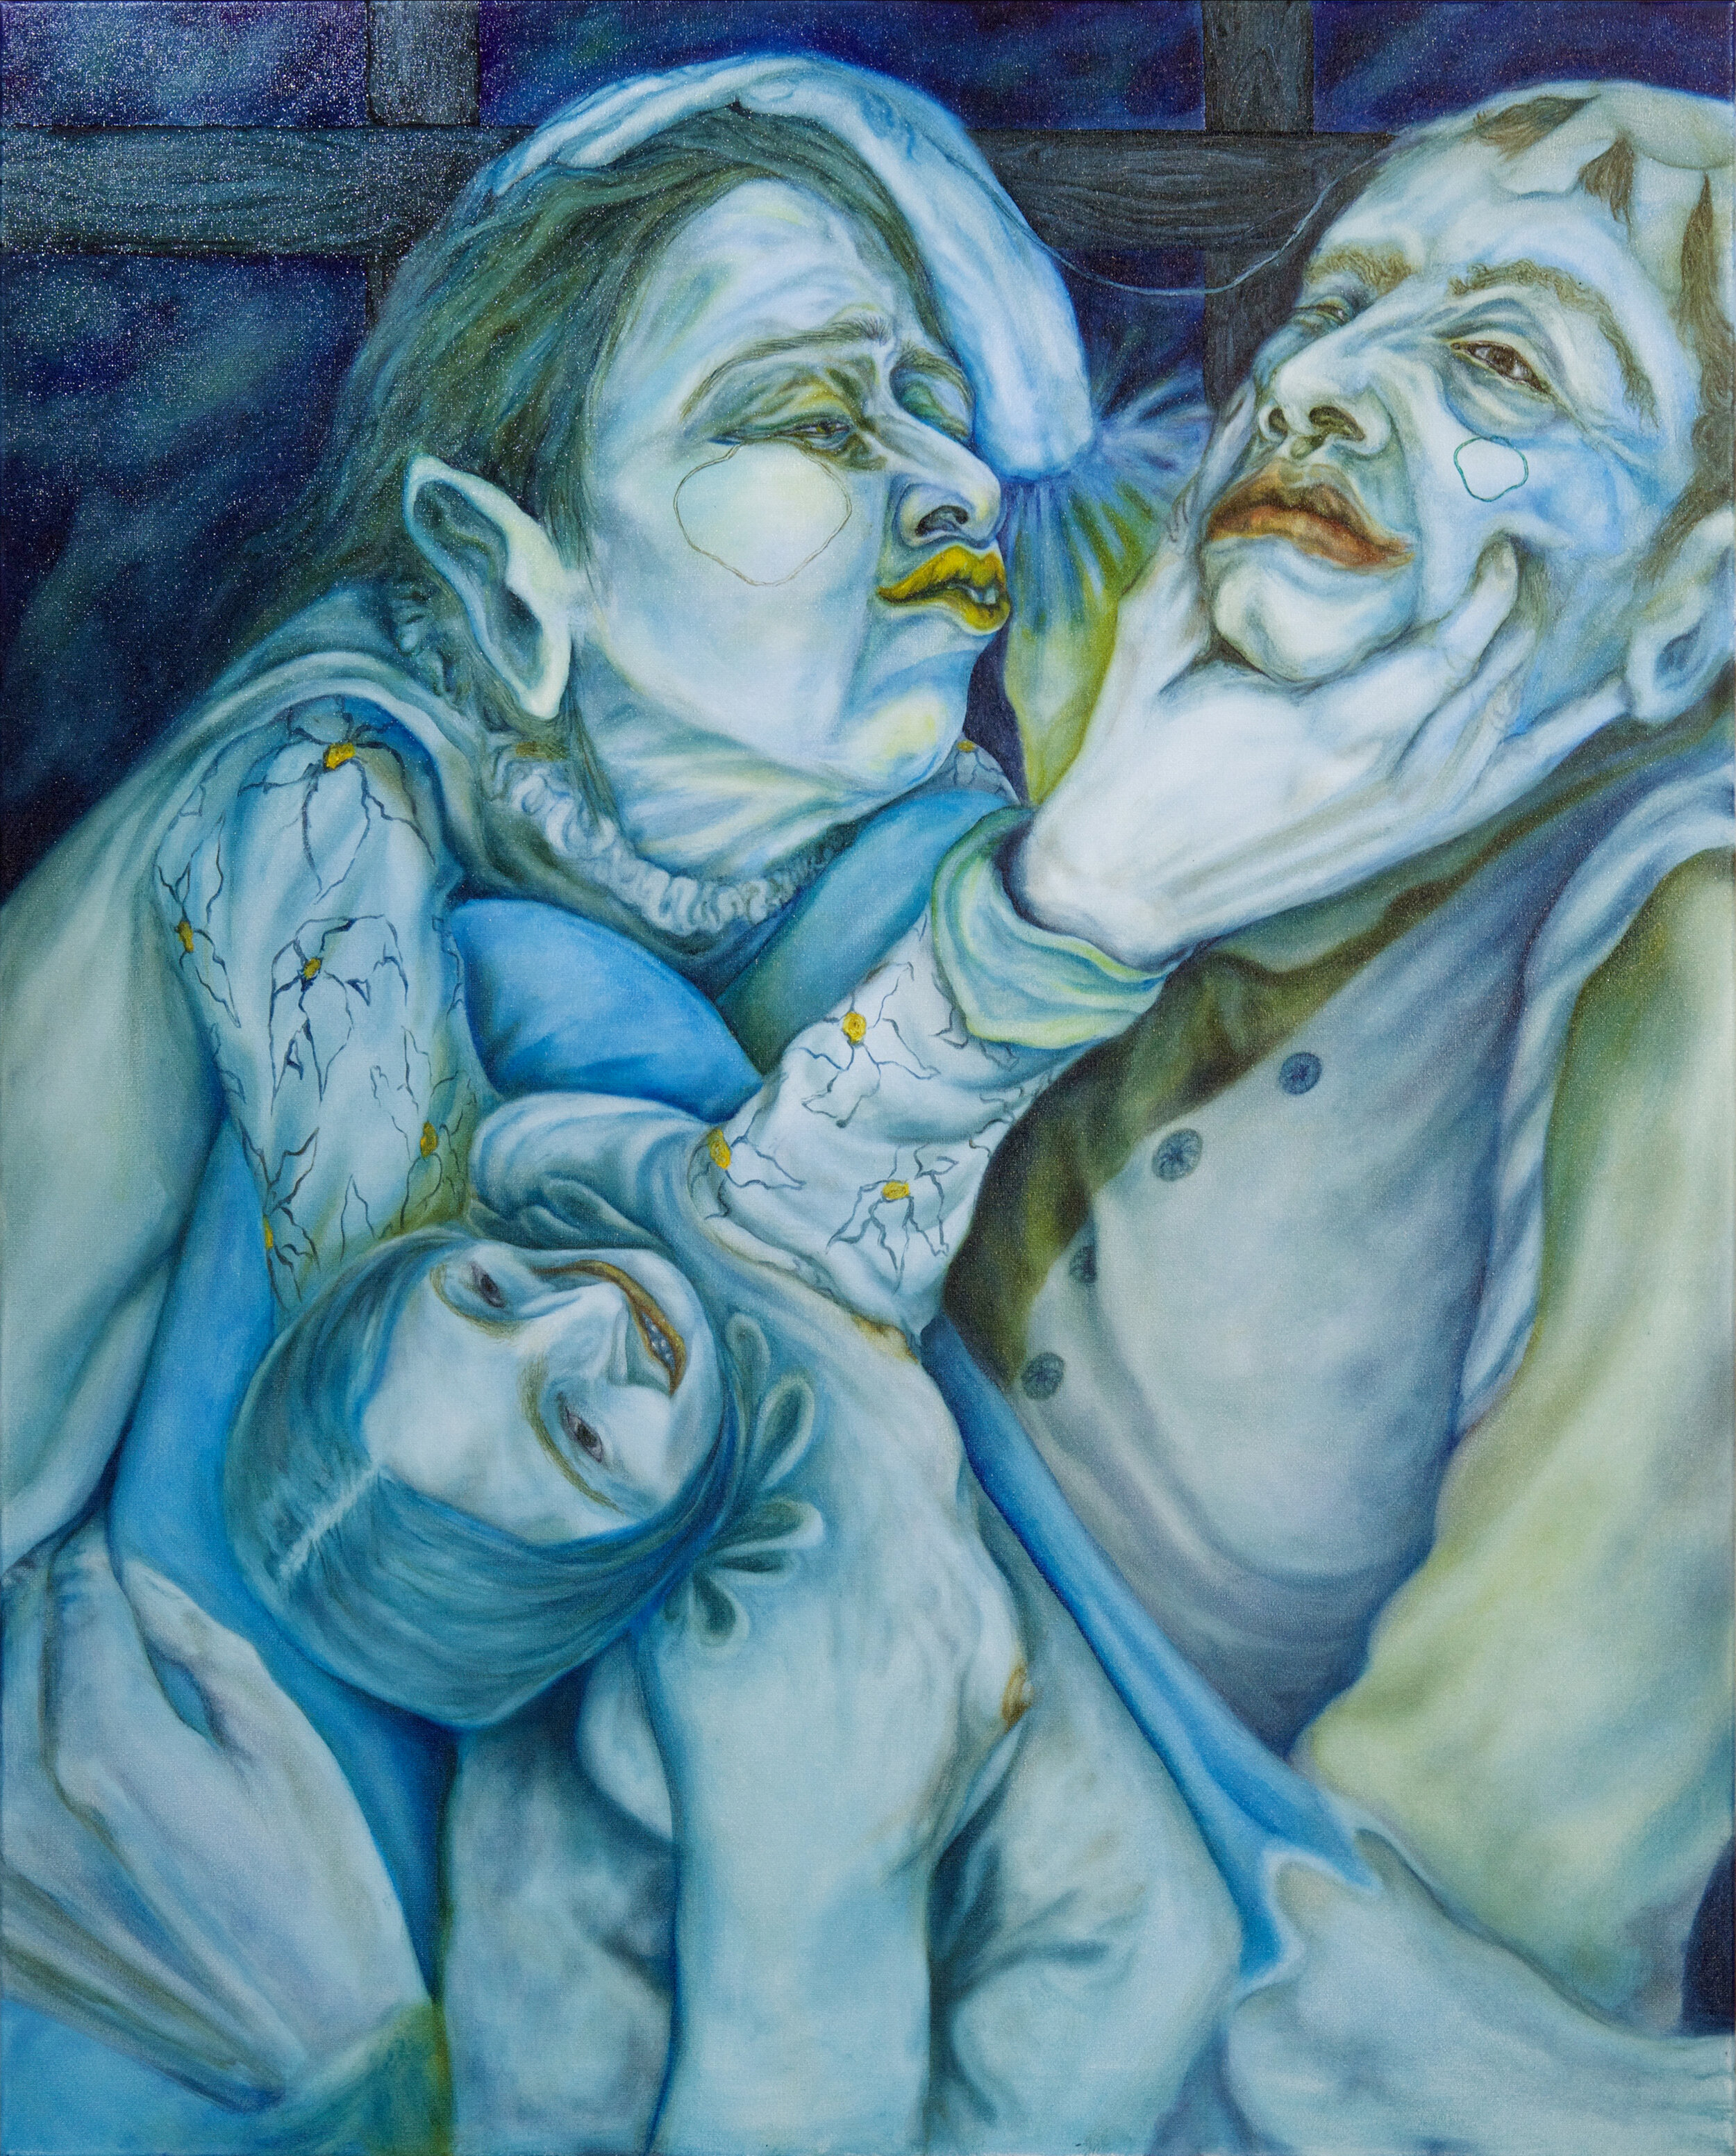   Blue Carrying Blue  2020 Oil on Canvas 100h x 60w cm  